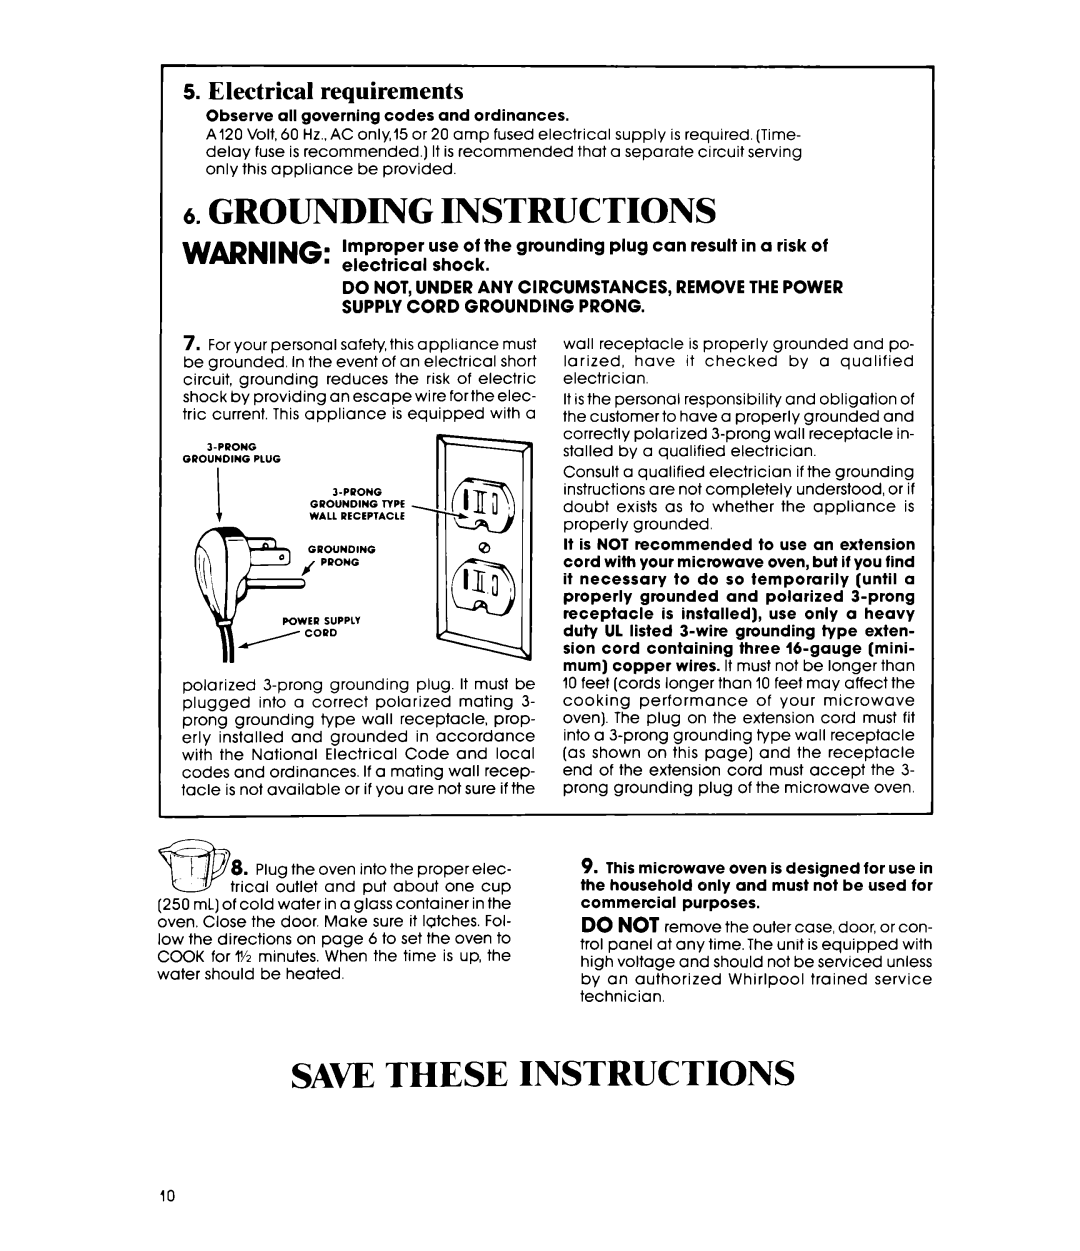 Whirlpool MW8200XR manual Grounding Instructions, Save These Instructions, Electrical requirements 